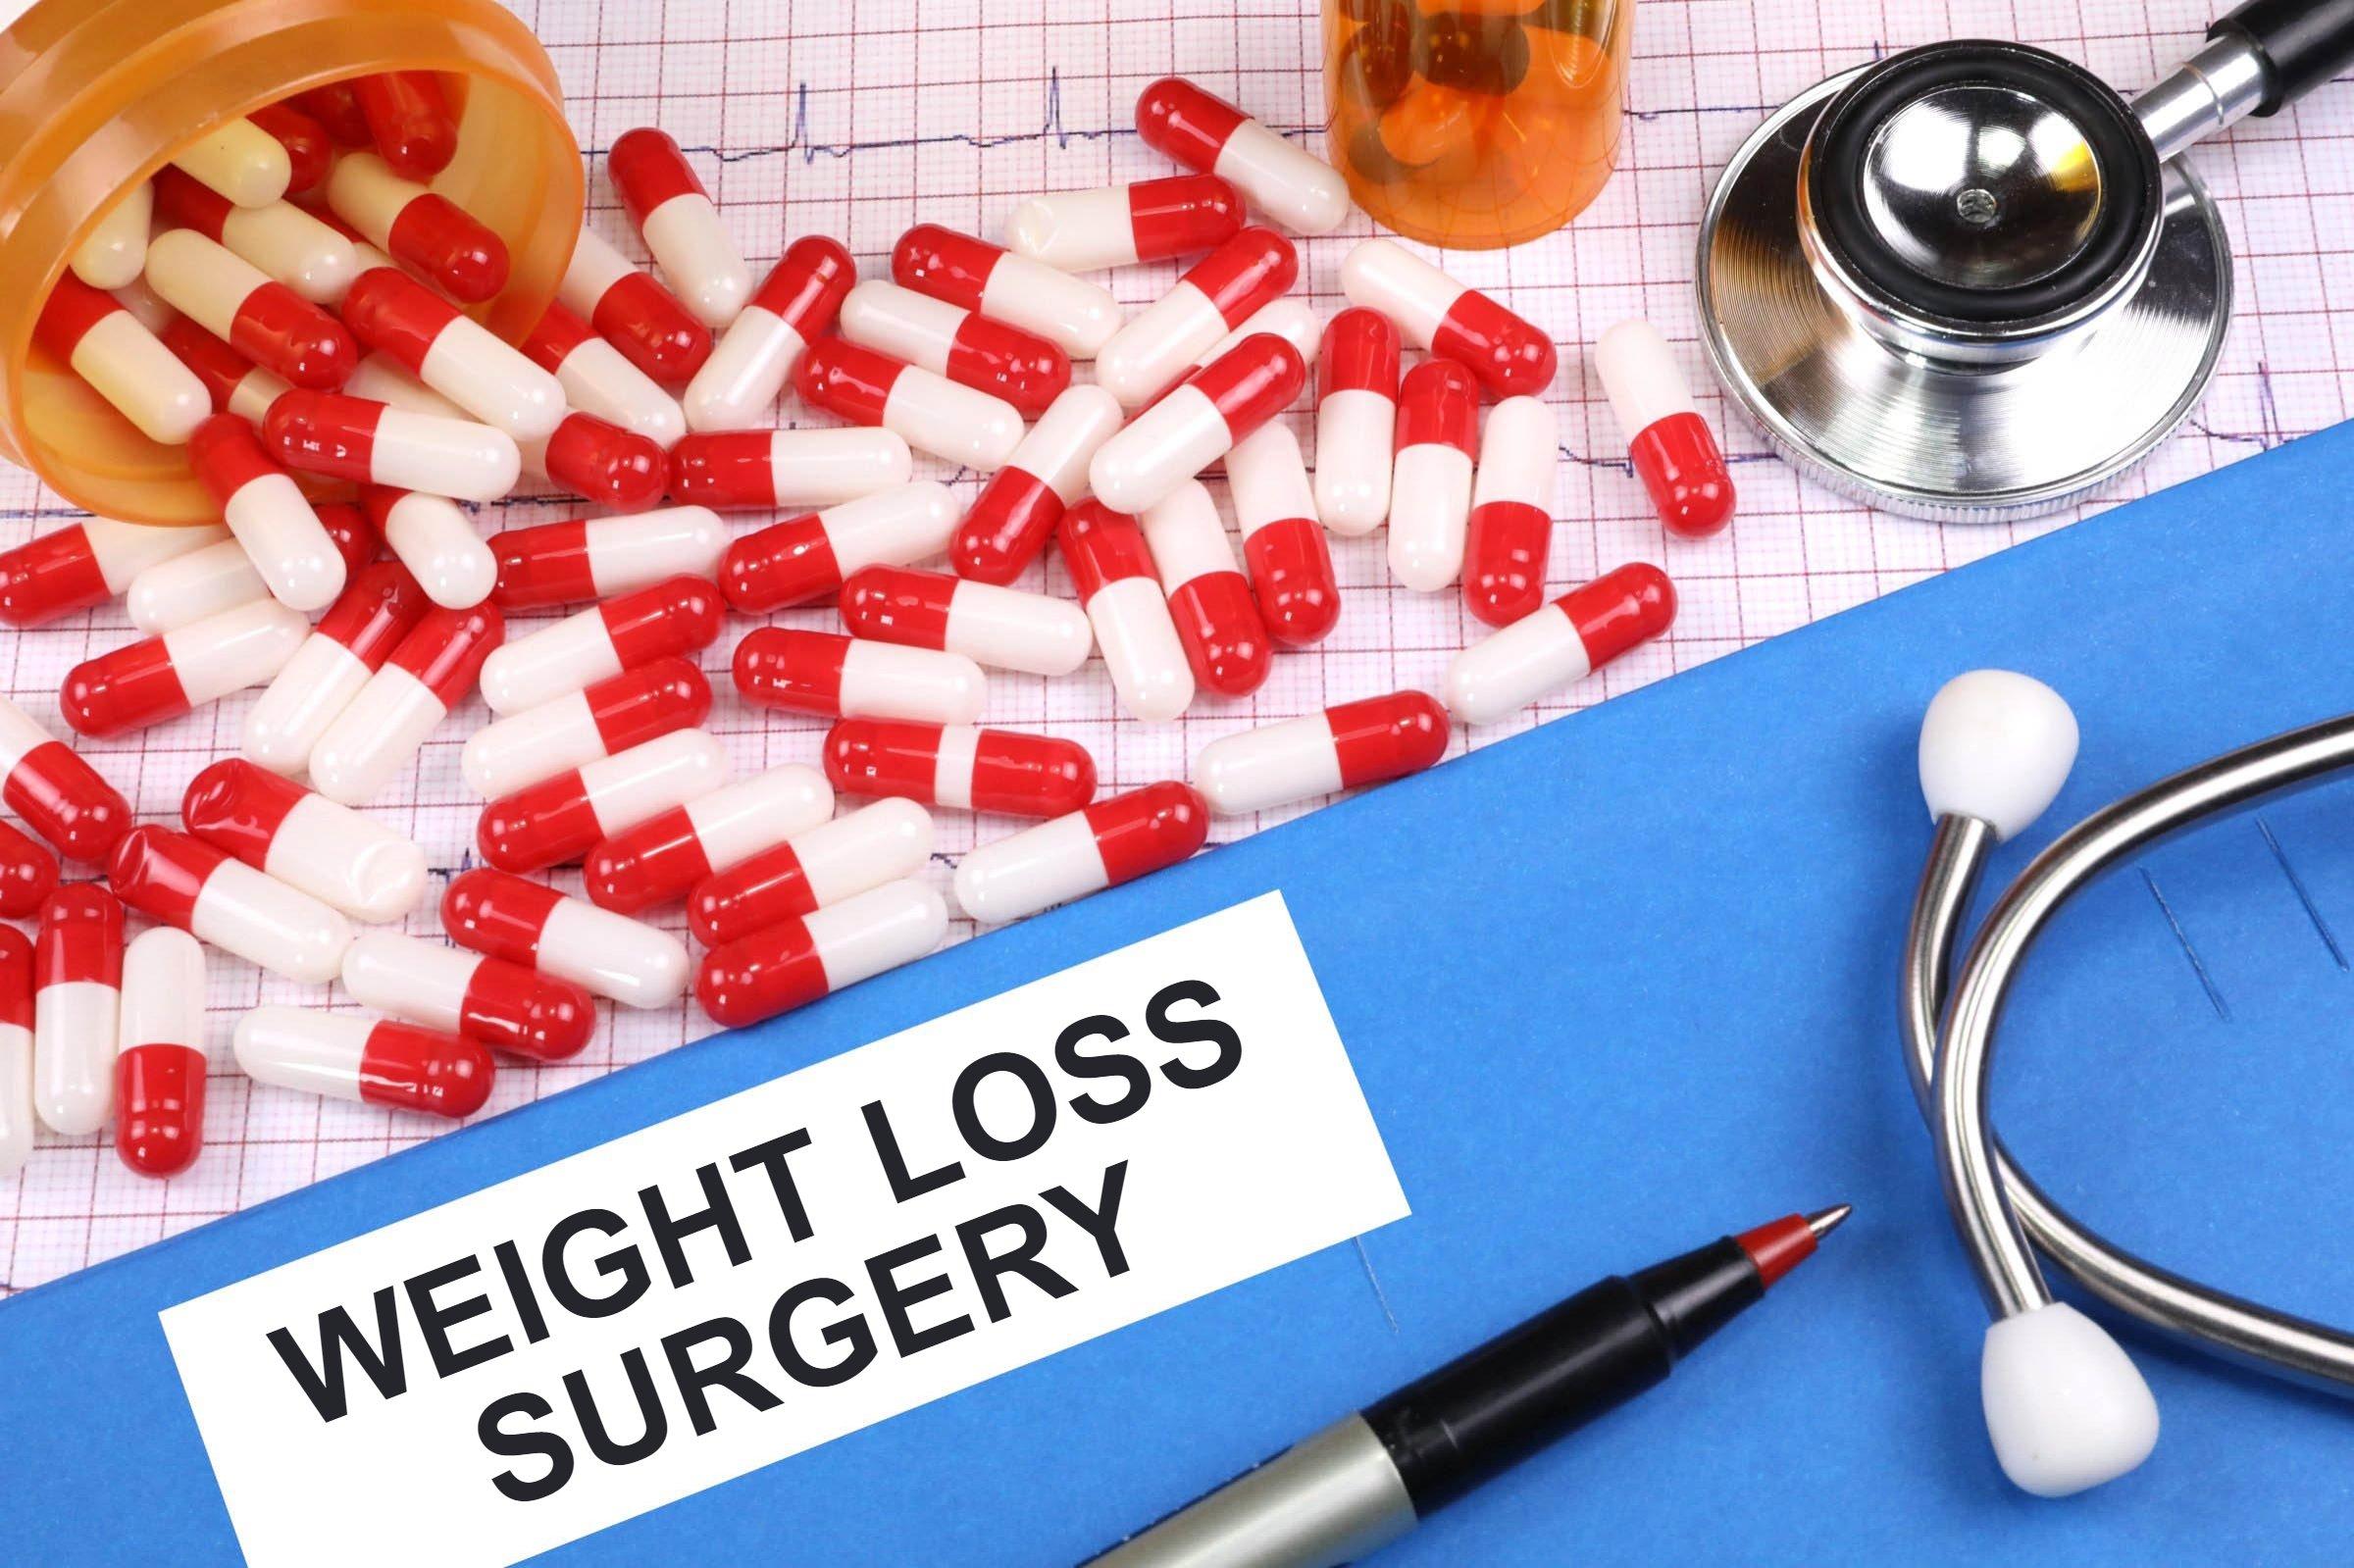 Article on WEIGHT LOSS SURGERY, BARIATRIC SURGERY, Sleeve Gastrectomy, and Gastric Bypass